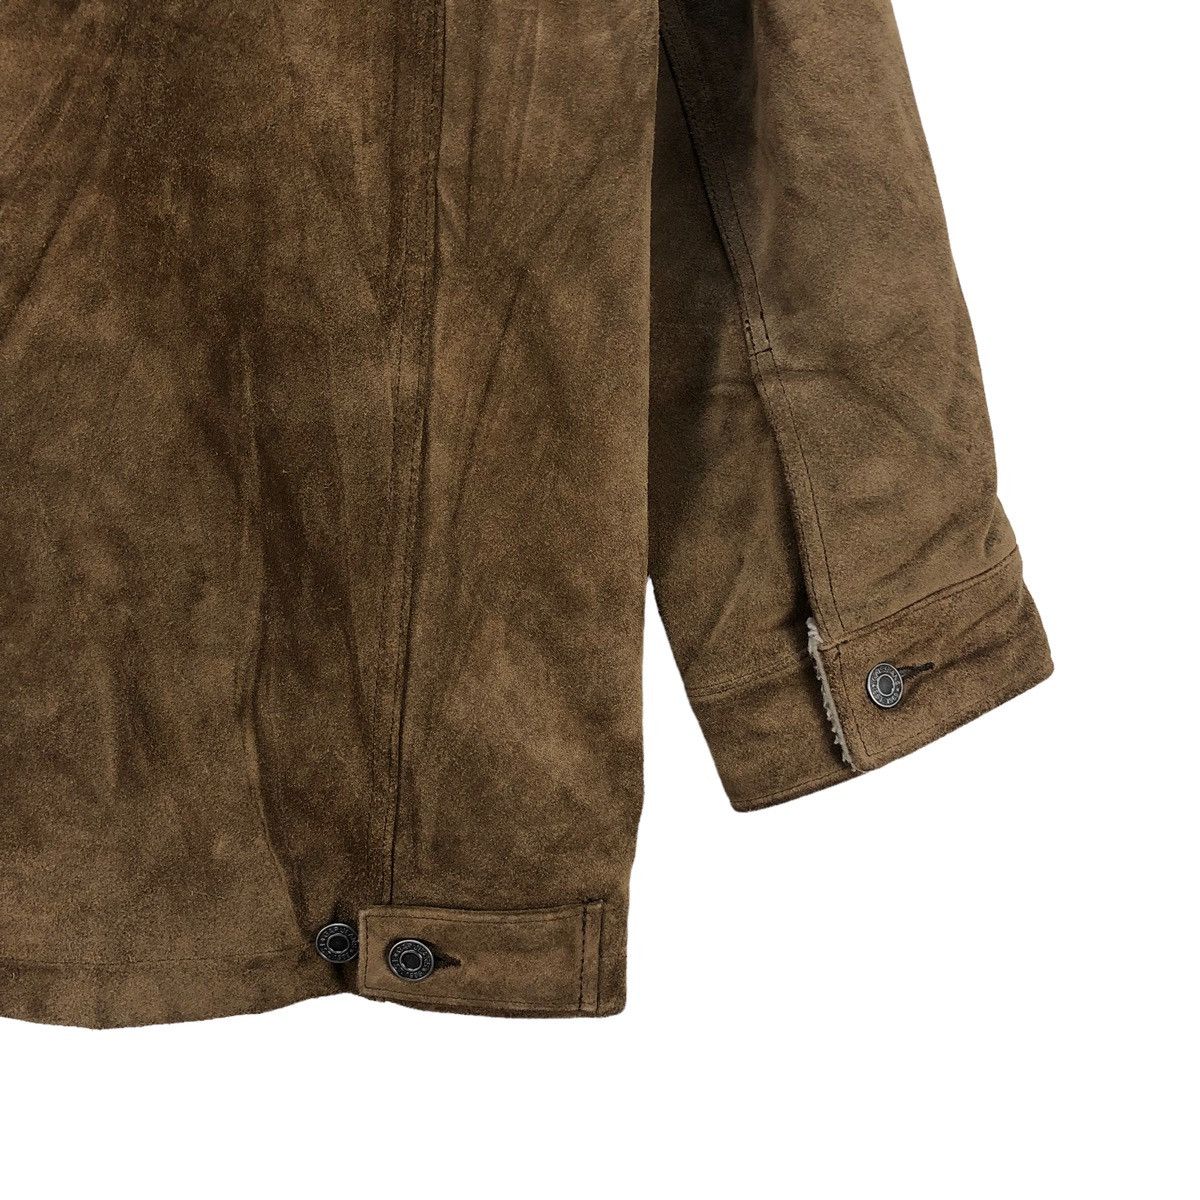 Genuine Leather - Gap Suede Leather Sherpa Jacket - 8